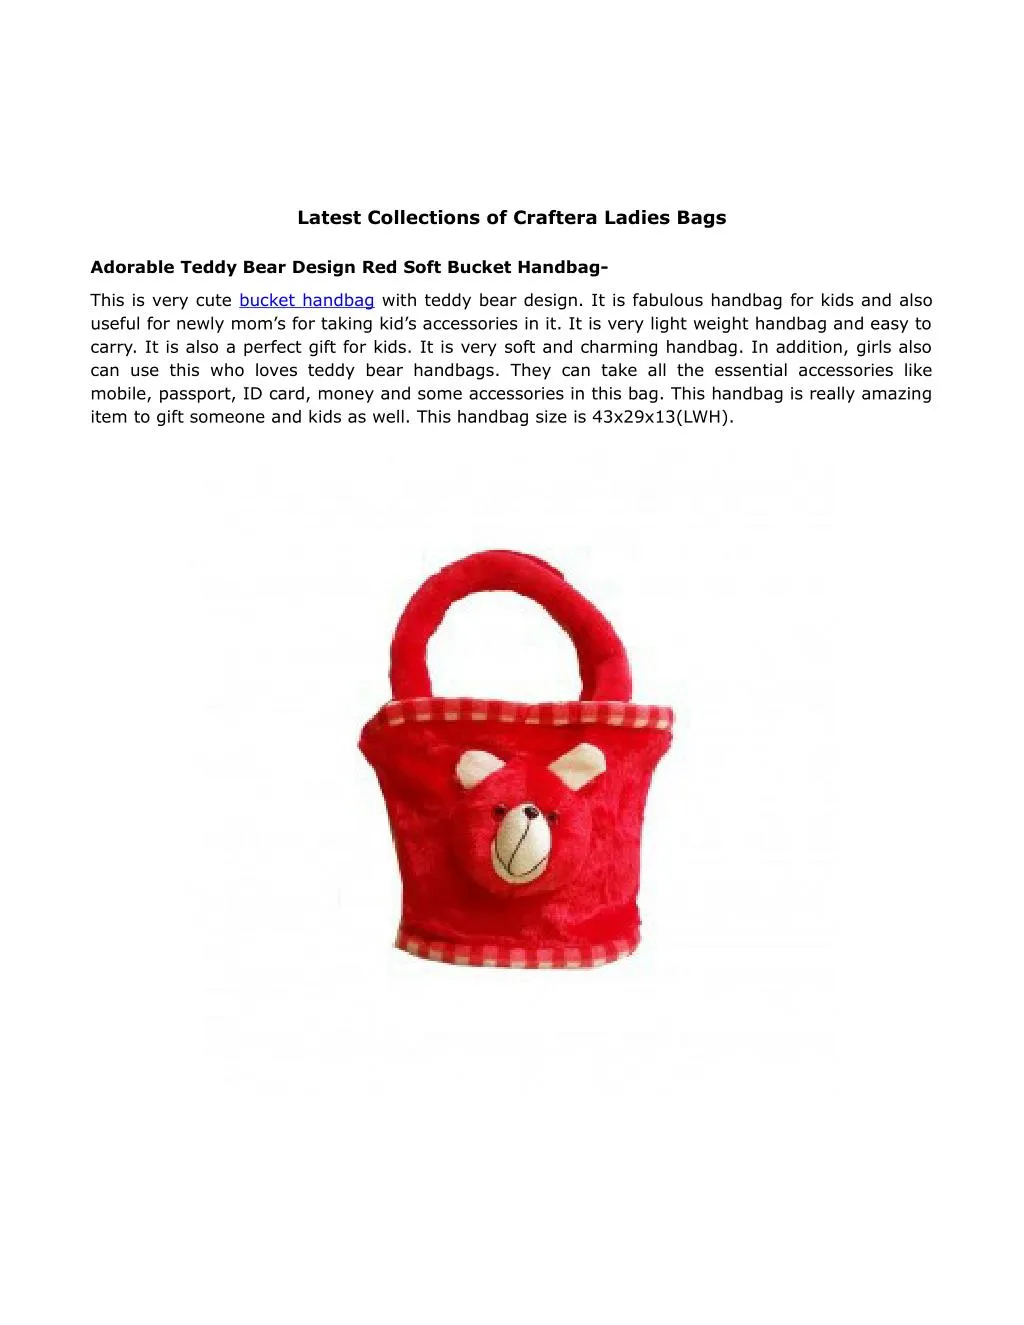 latest collections of craftera ladies bags n.